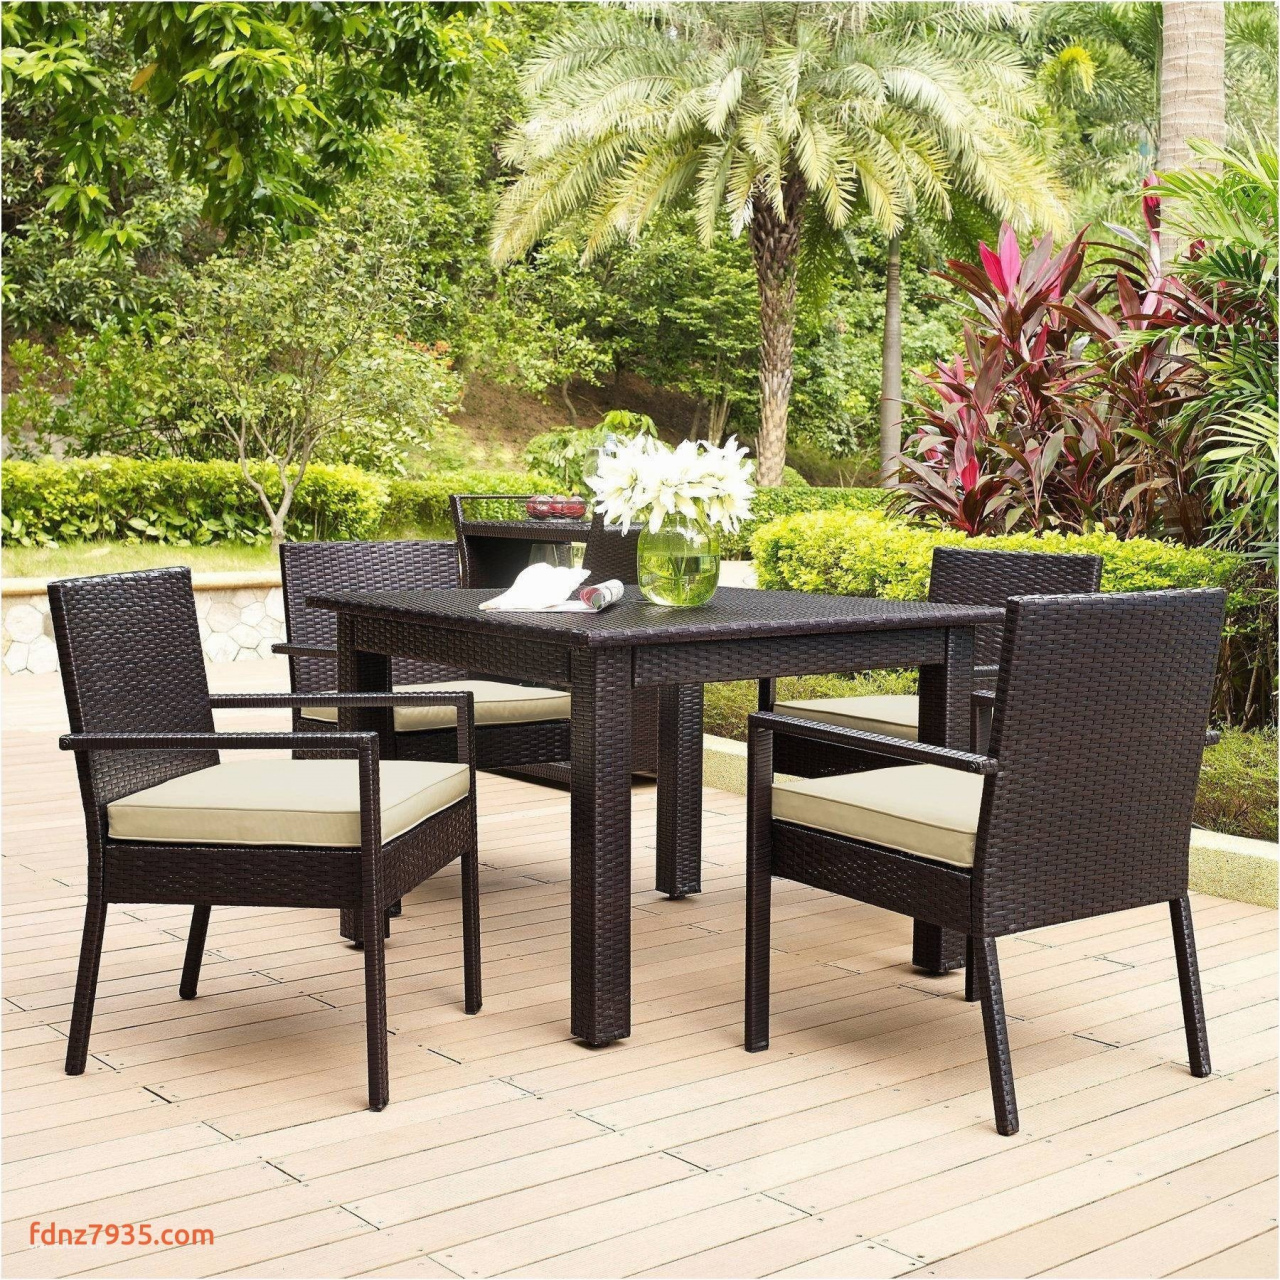 front patio ideas front patio furniture durch front patio ideas